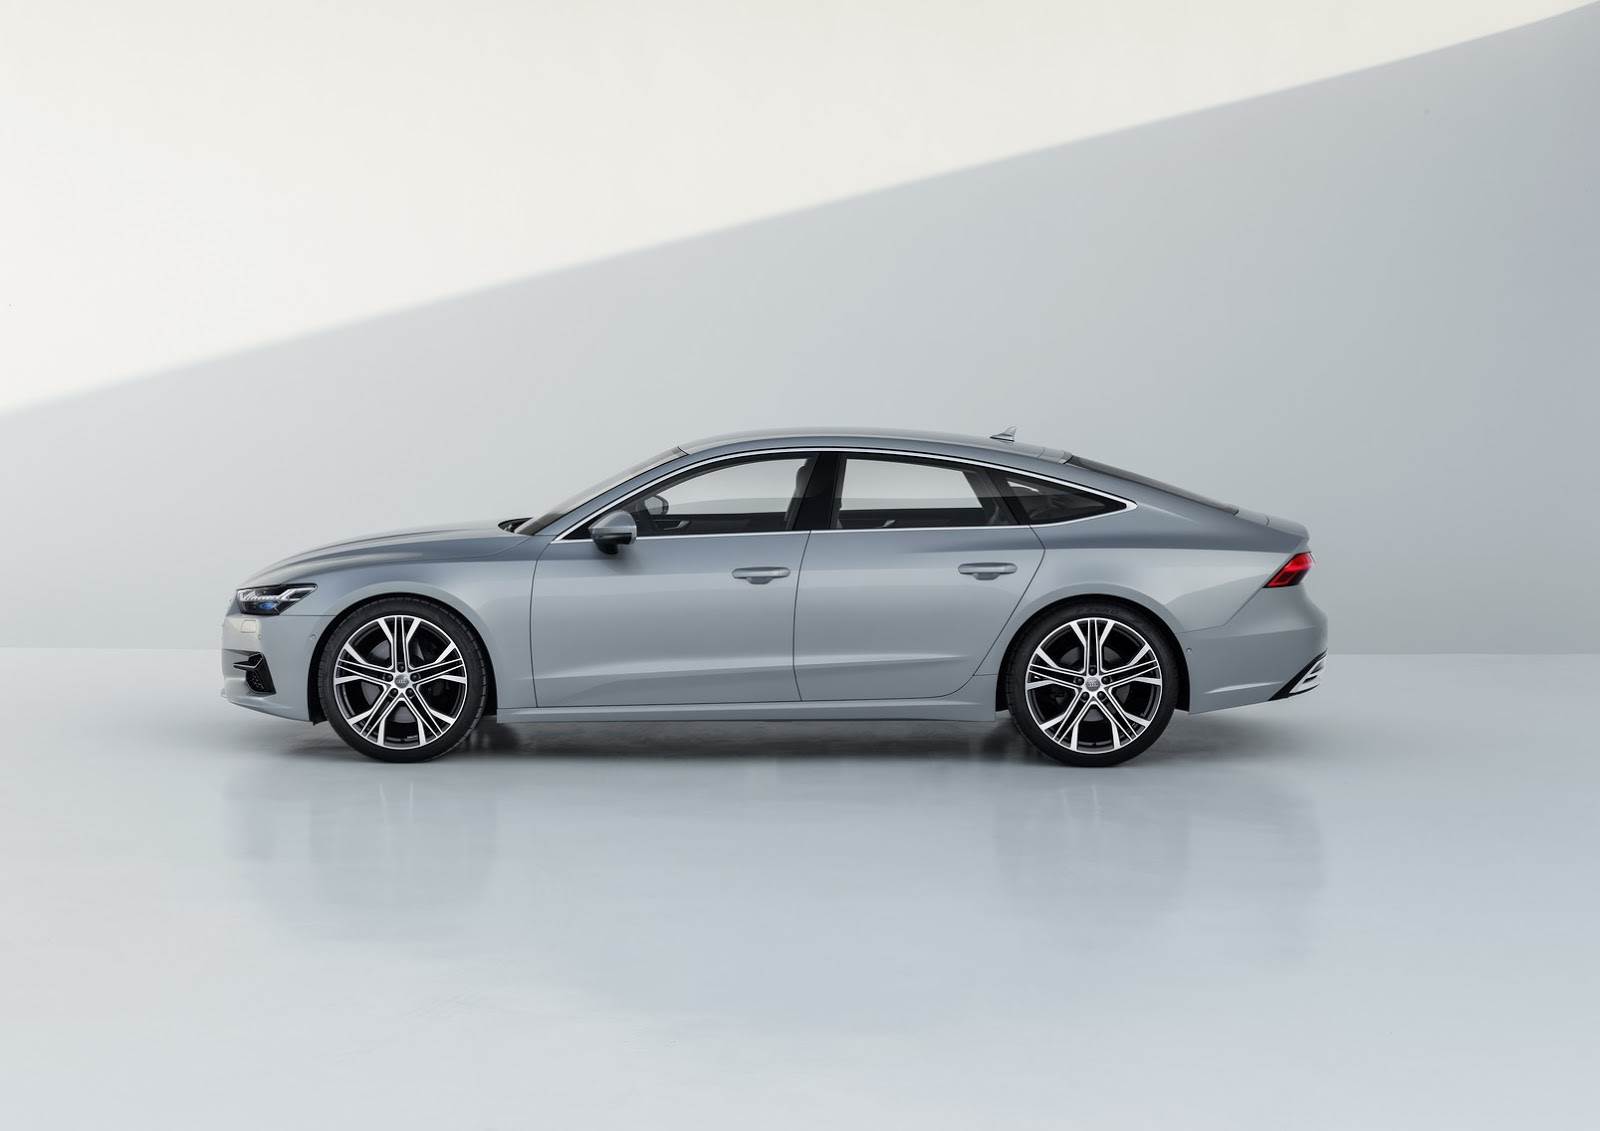 NEW 2024 Audi A7 Sportback Facelift - Interior and Exterior Walkaround 